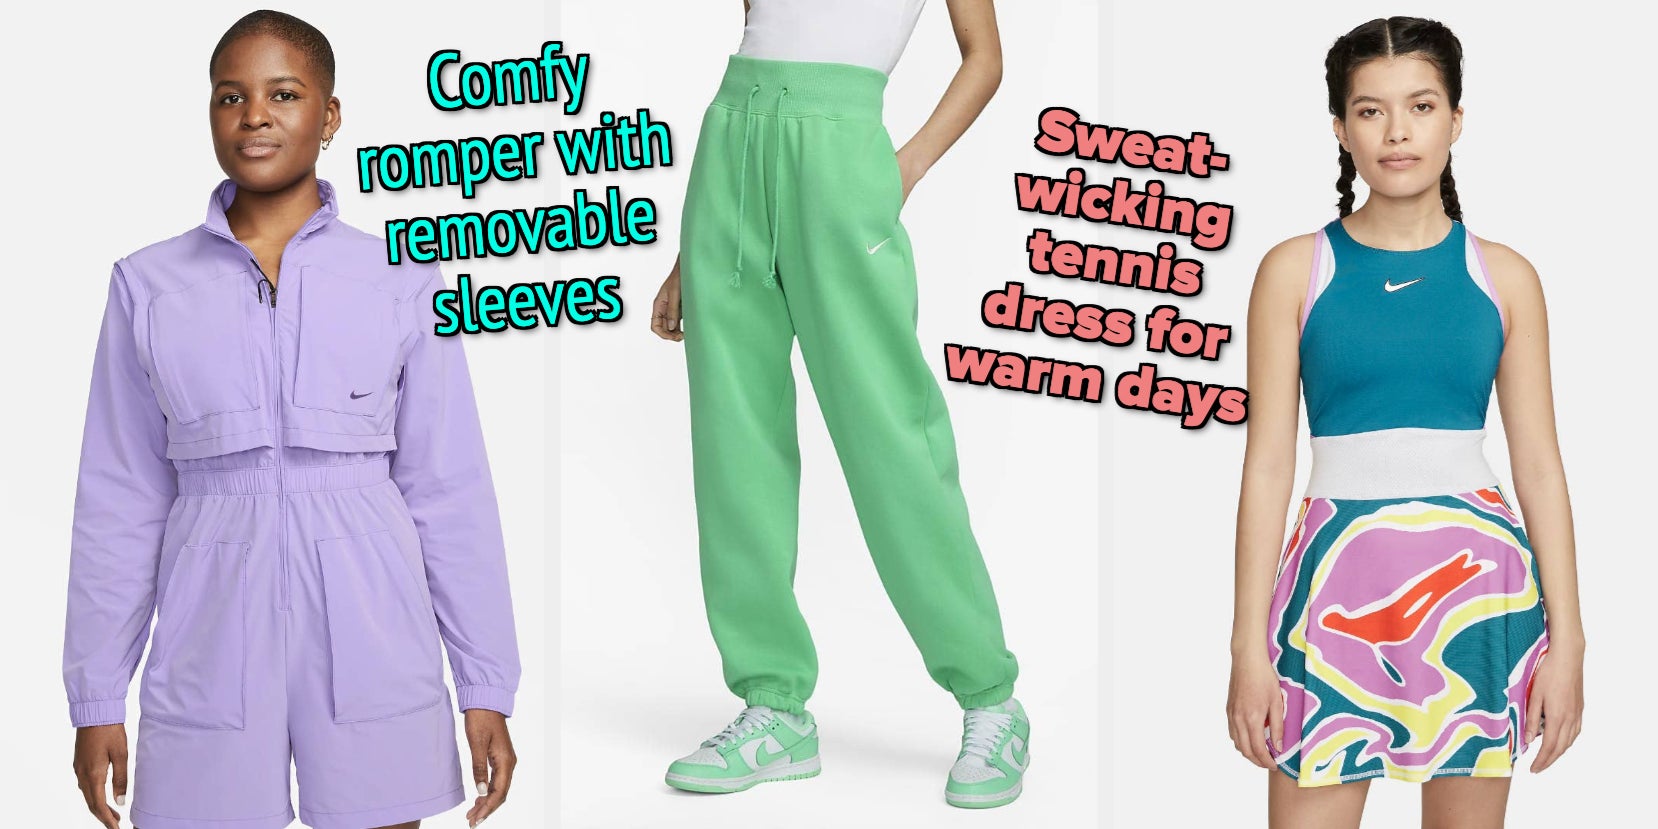 How To Make Sweatpants Into Shorts? – solowomen